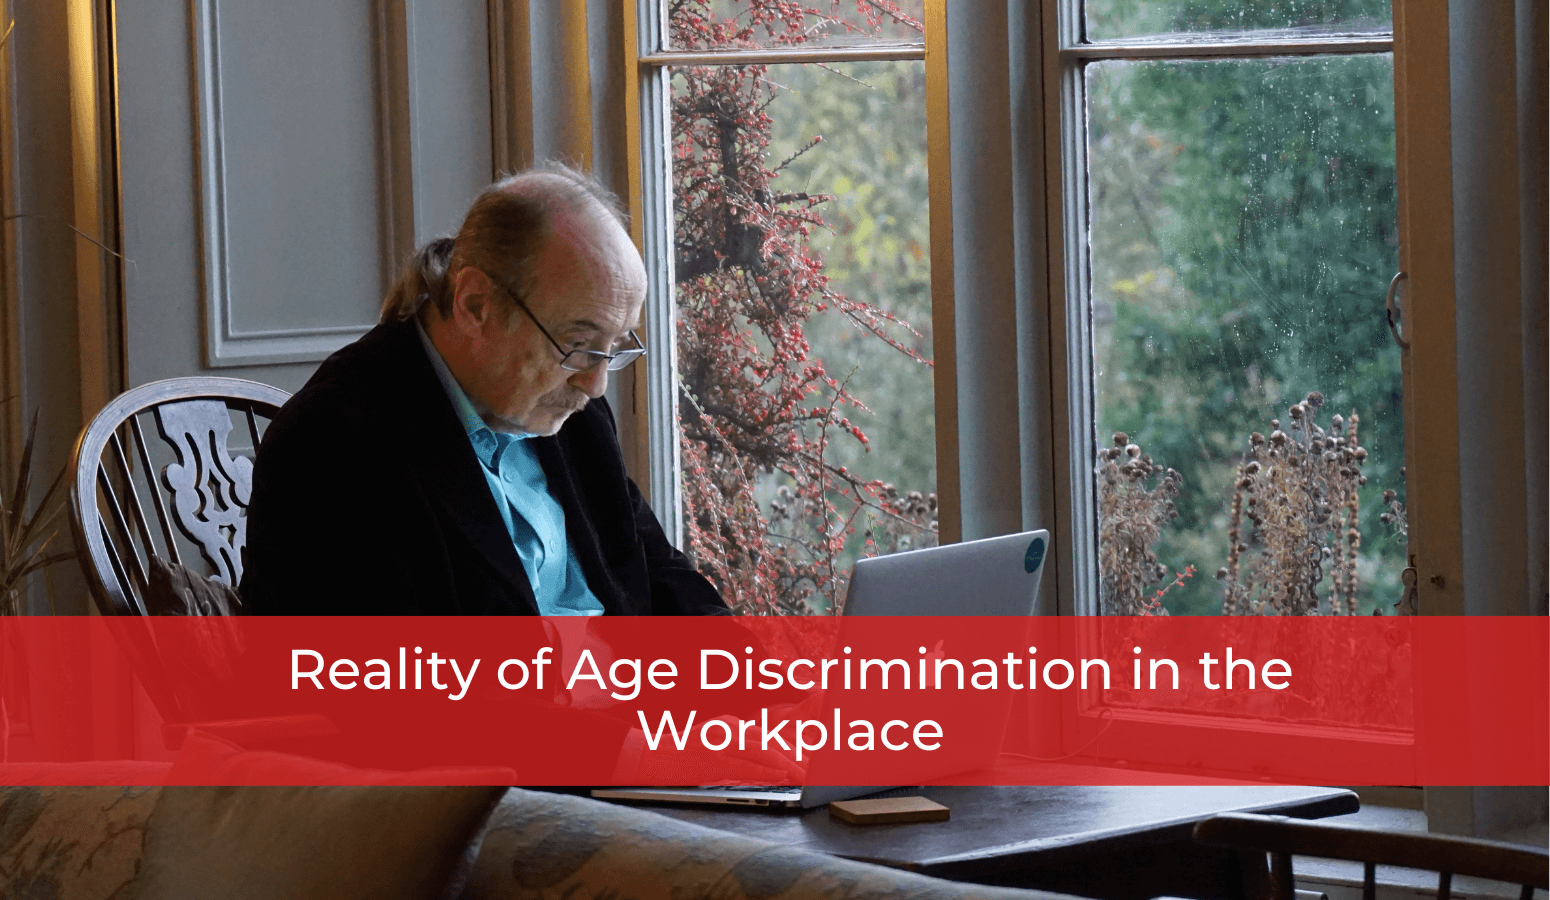 Featured image for “Reality of Age Discrimination in the Workplace”